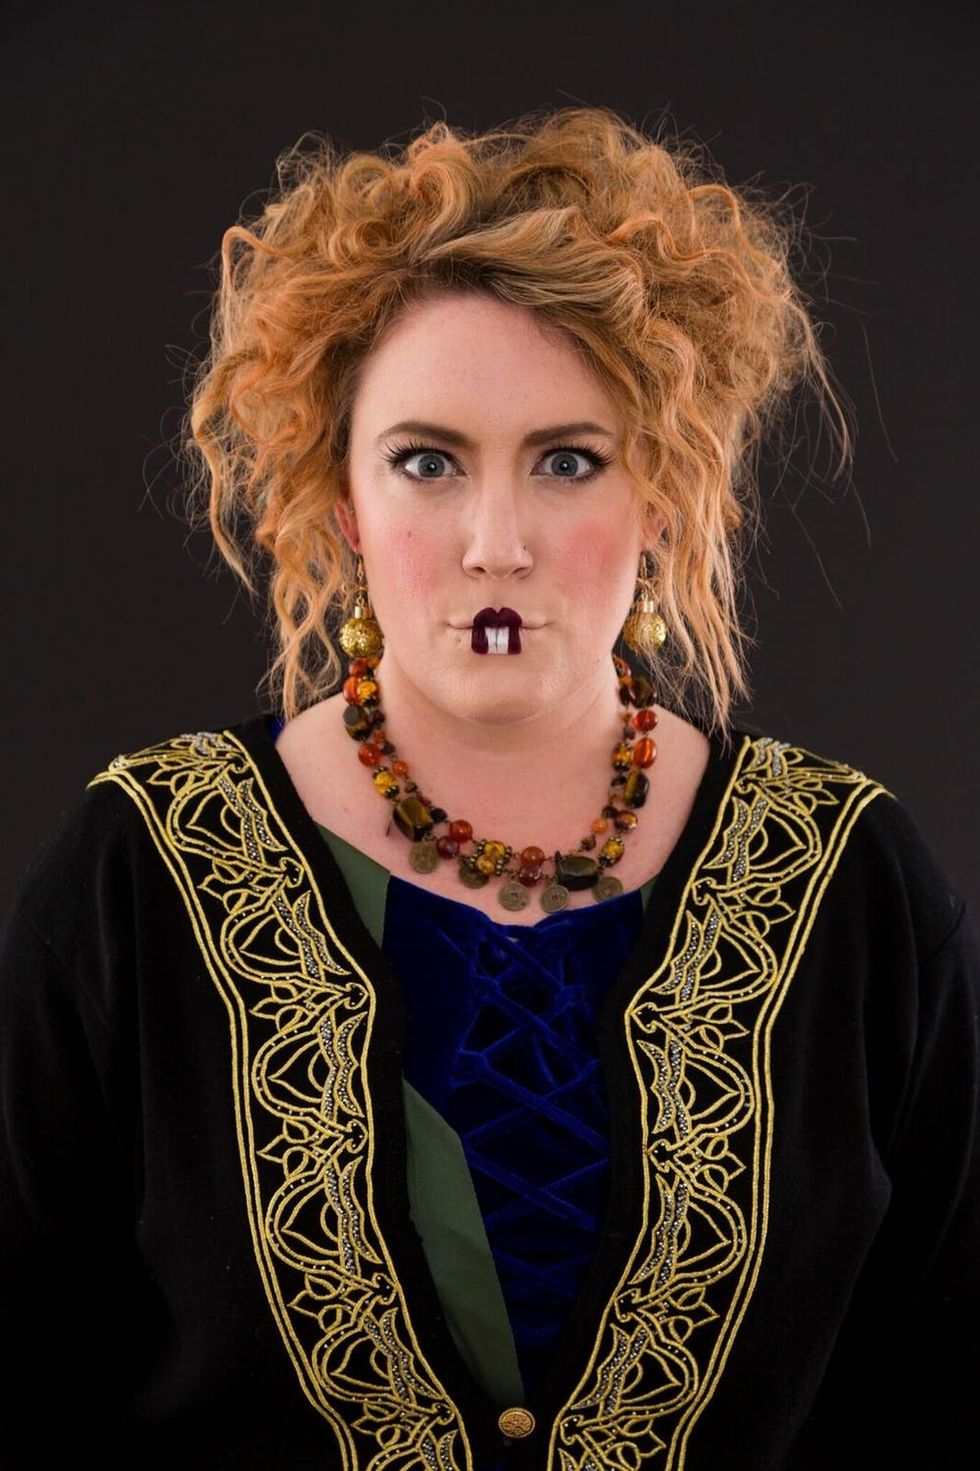 Woman dressed up as Winifred Sanderson from Hocus Pocus. 